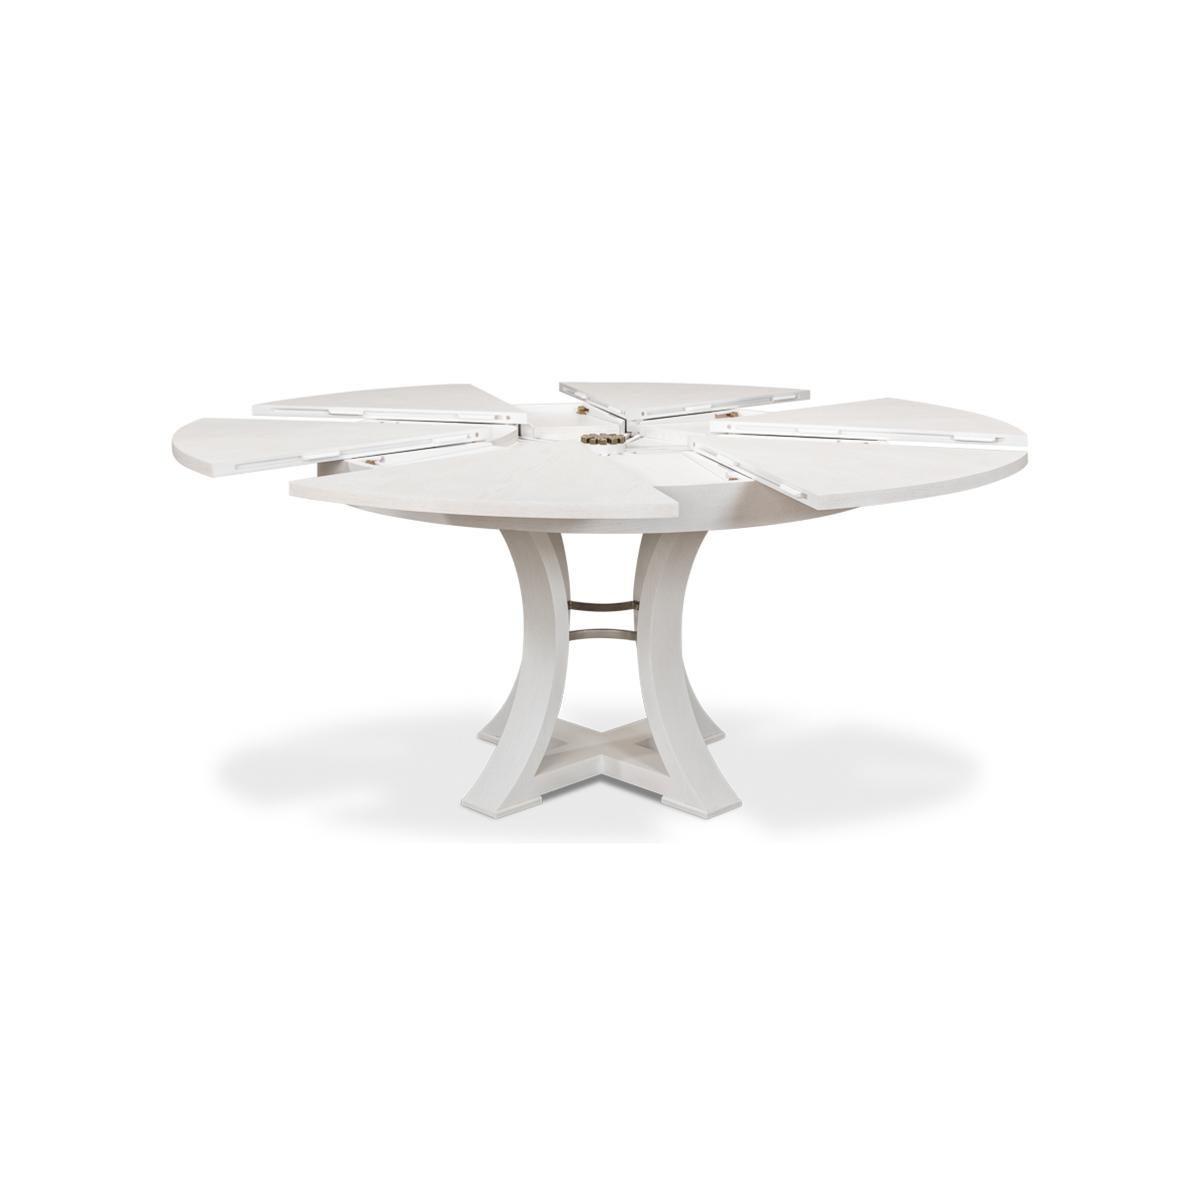 A modern round extending dining room table. Oak top in our working white finish with a simple geometric form base. The table opens and extends to 70